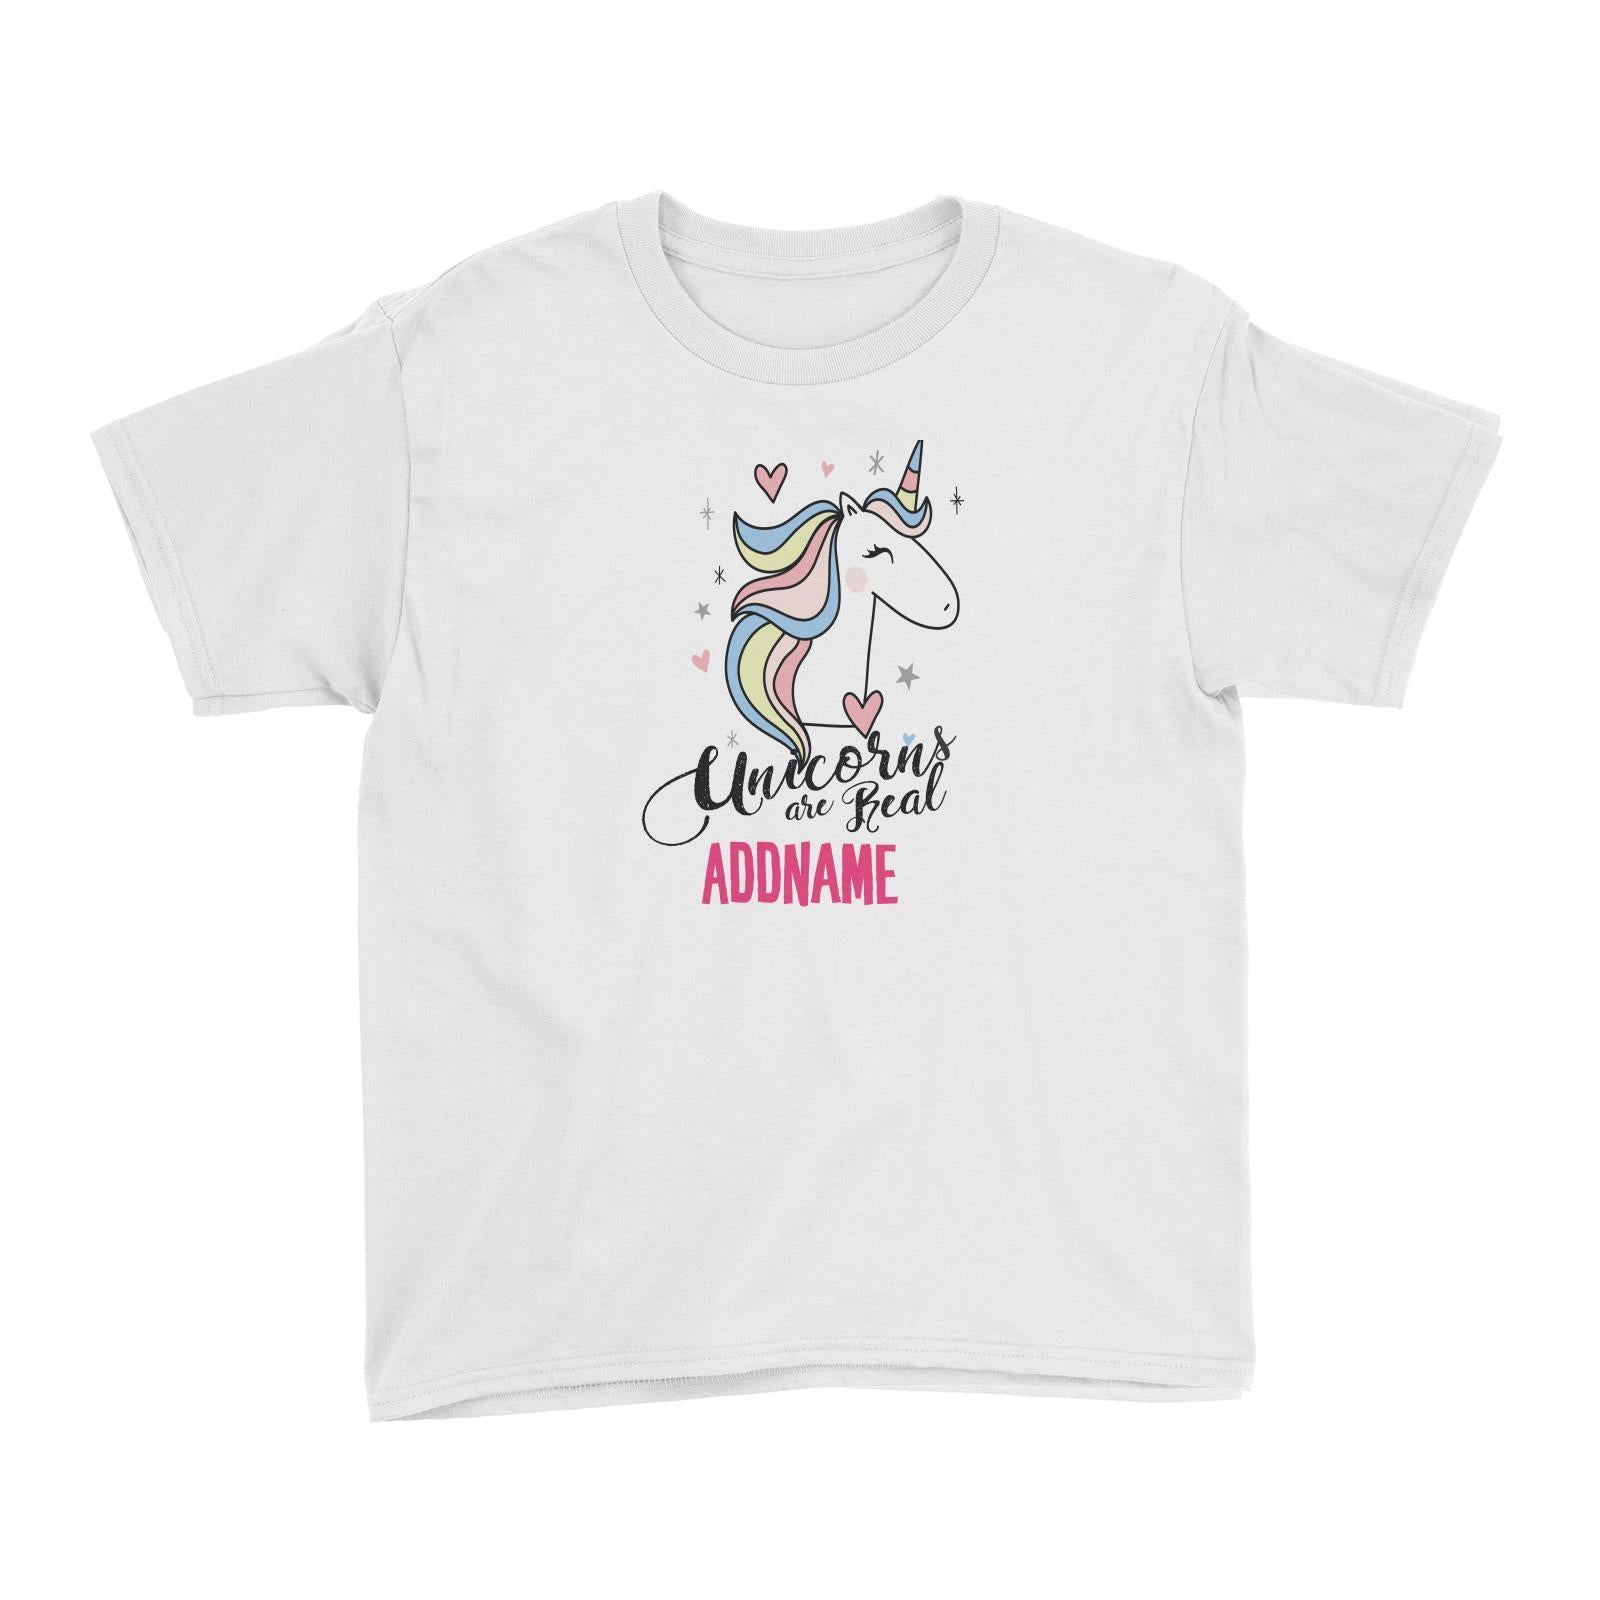 Cool Vibrant Series Unicorns Are Real Addname Kid's T-Shirt